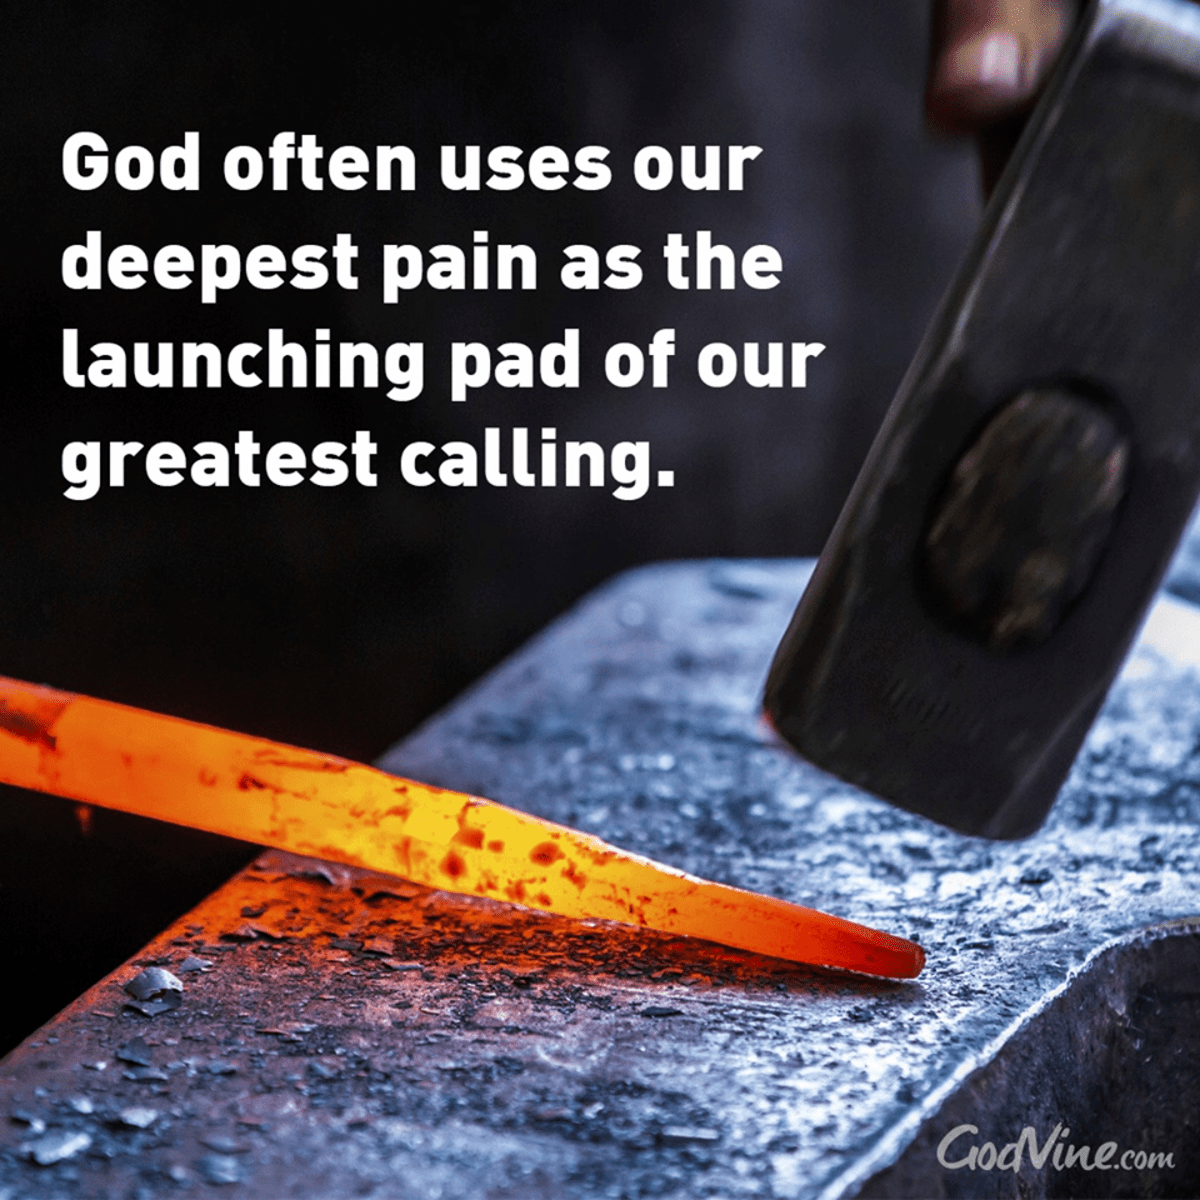 Our Deepest Pain, Our Greatest Calling